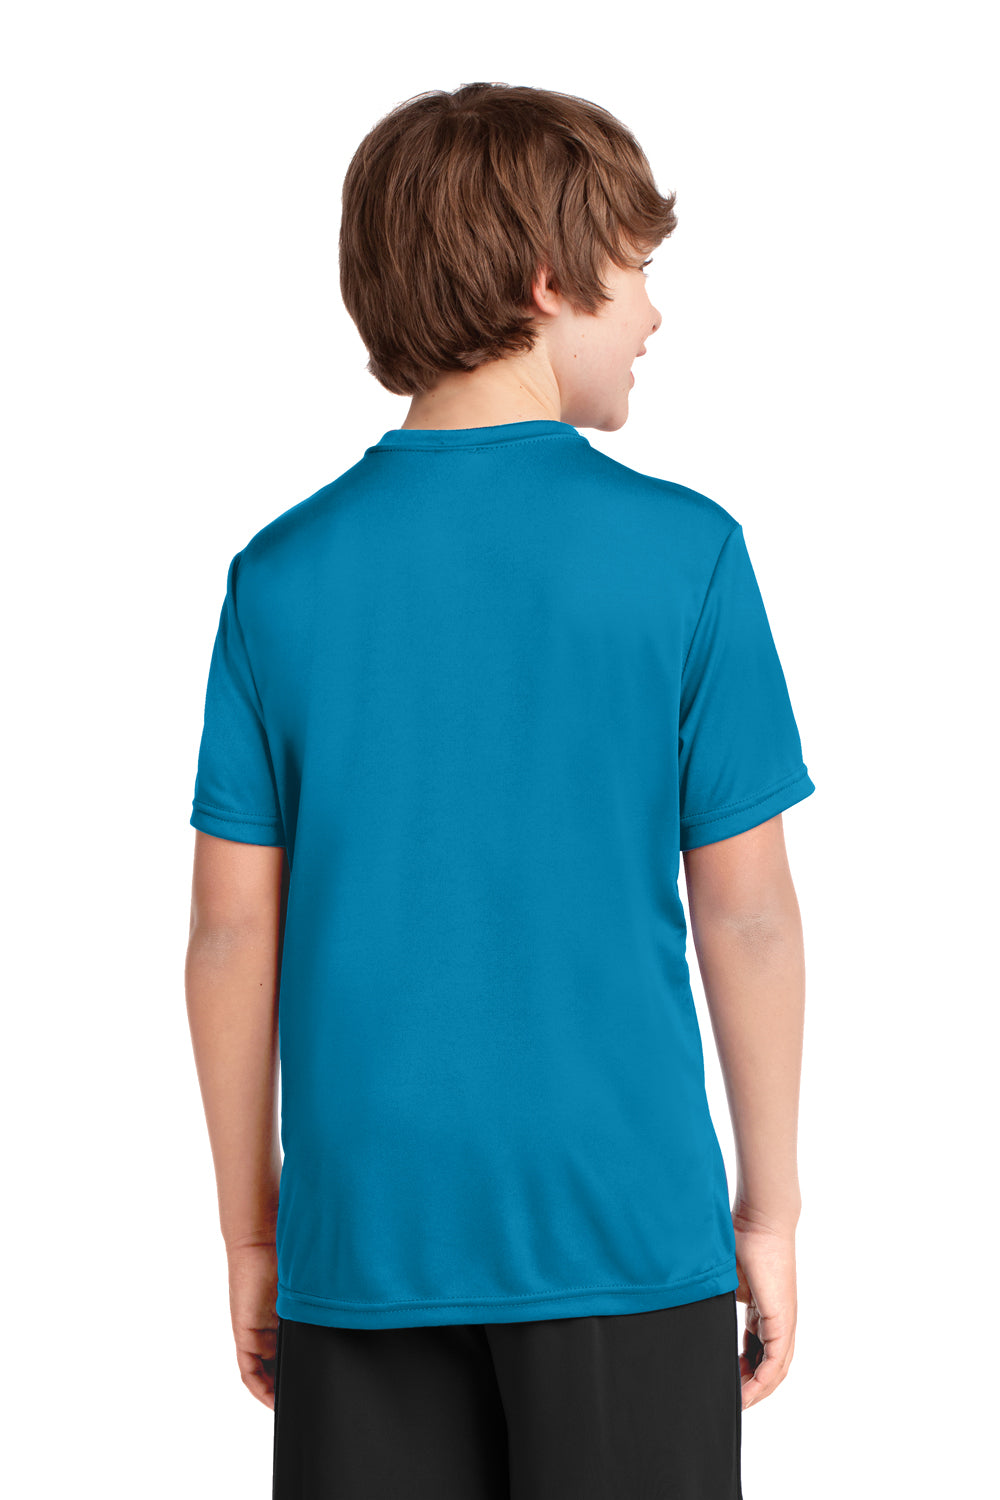 Port & Company PC380Y Youth Dry Zone Performance Moisture Wicking Short Sleeve Crewneck T-Shirt Neon Blue Back